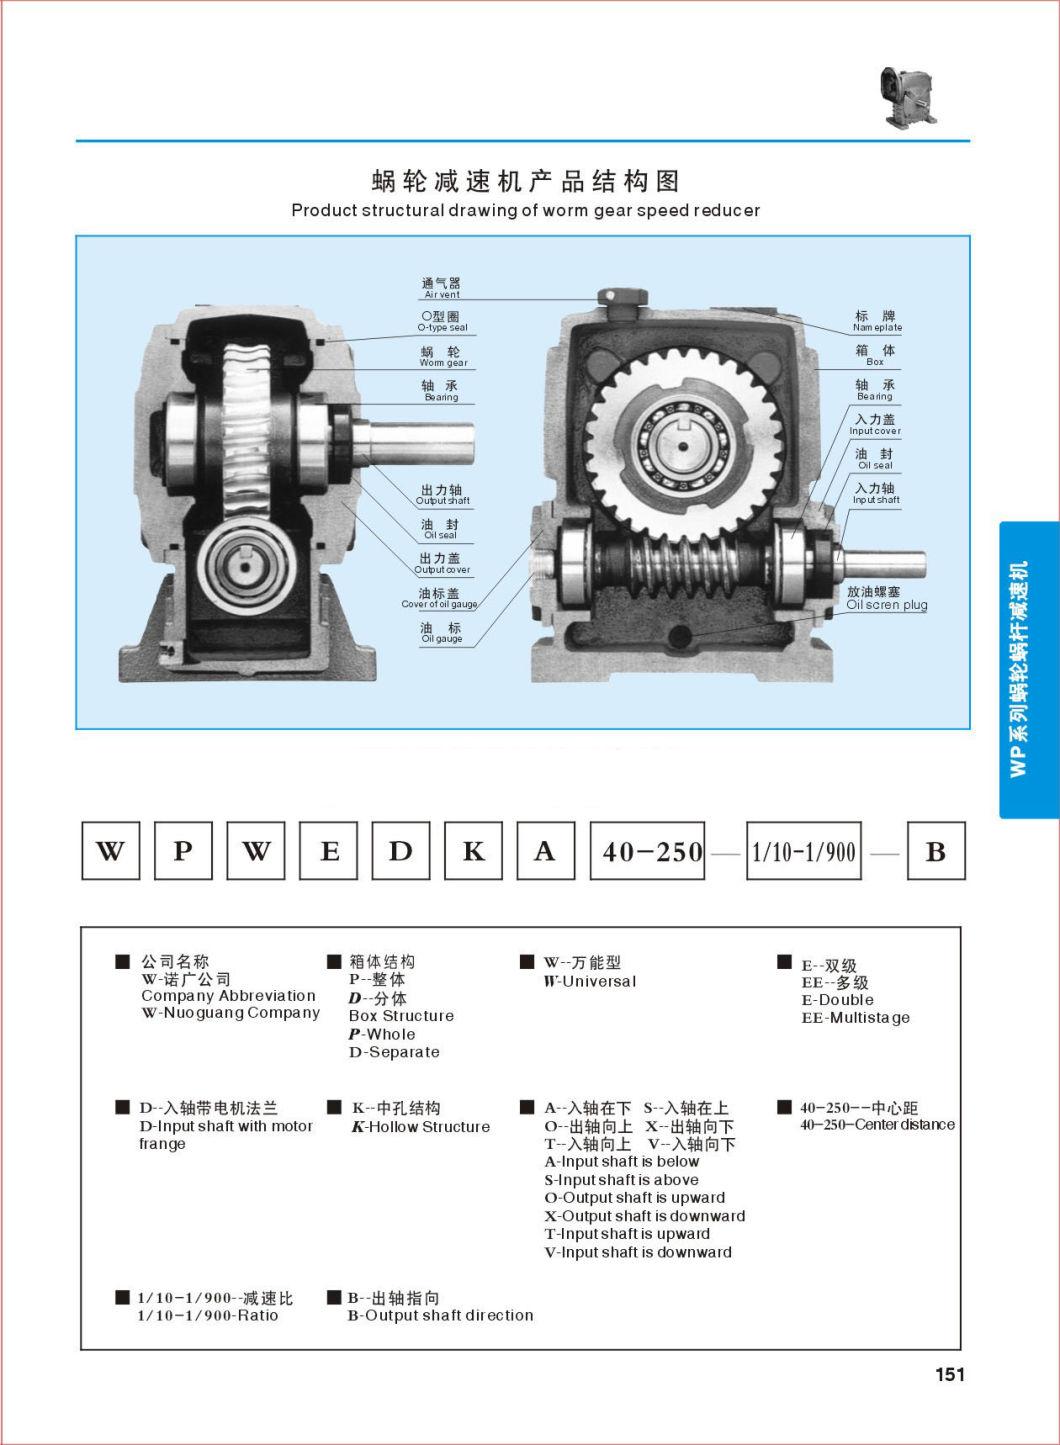 High Quality Worm Series Wp Speed Reducer Gearbox